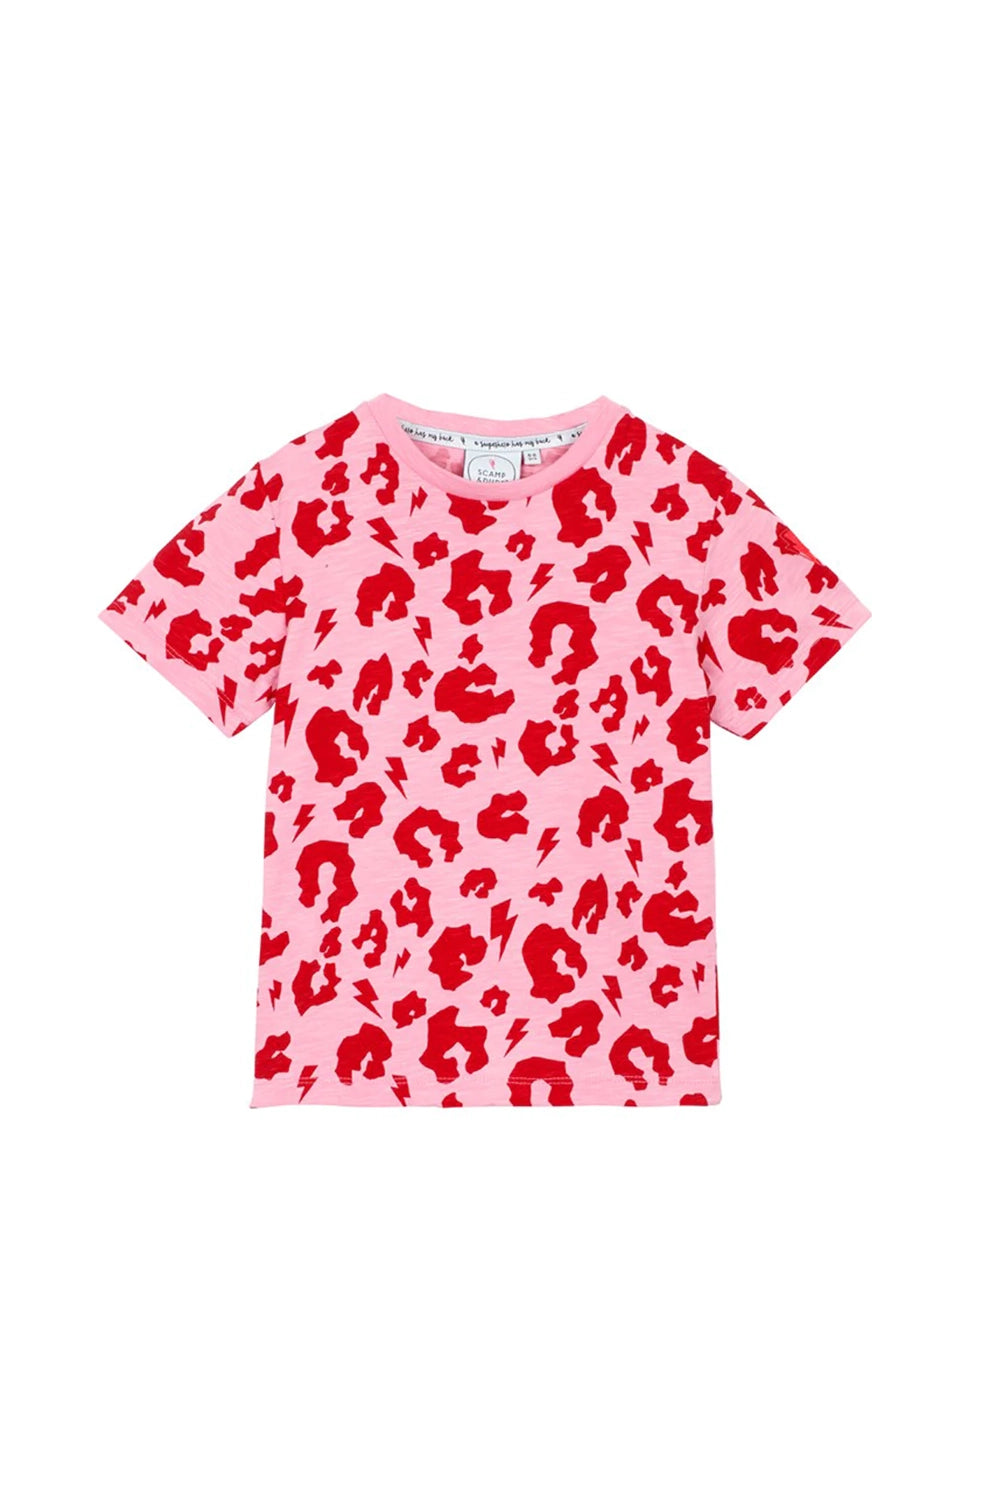 Kids T-Shirt Pink with Red Leopard Print and Lightning Bolt Print ...